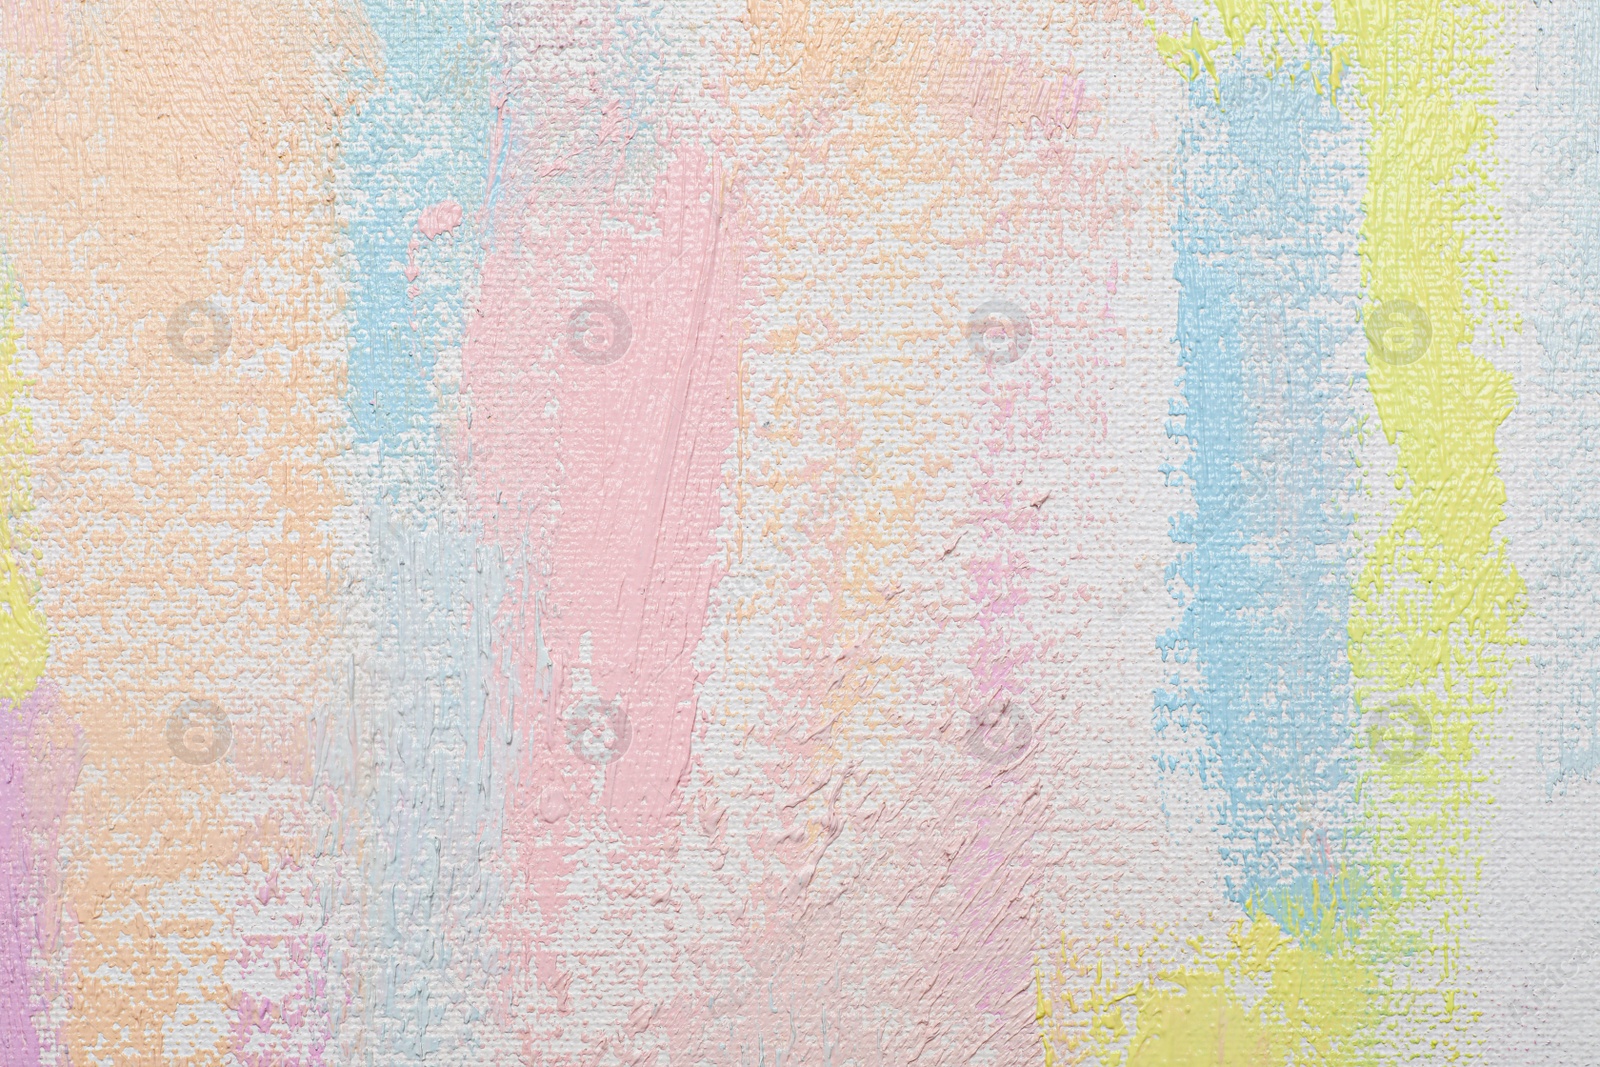 Photo of Strokes of different pastel acrylic paints on white canvas, closeup